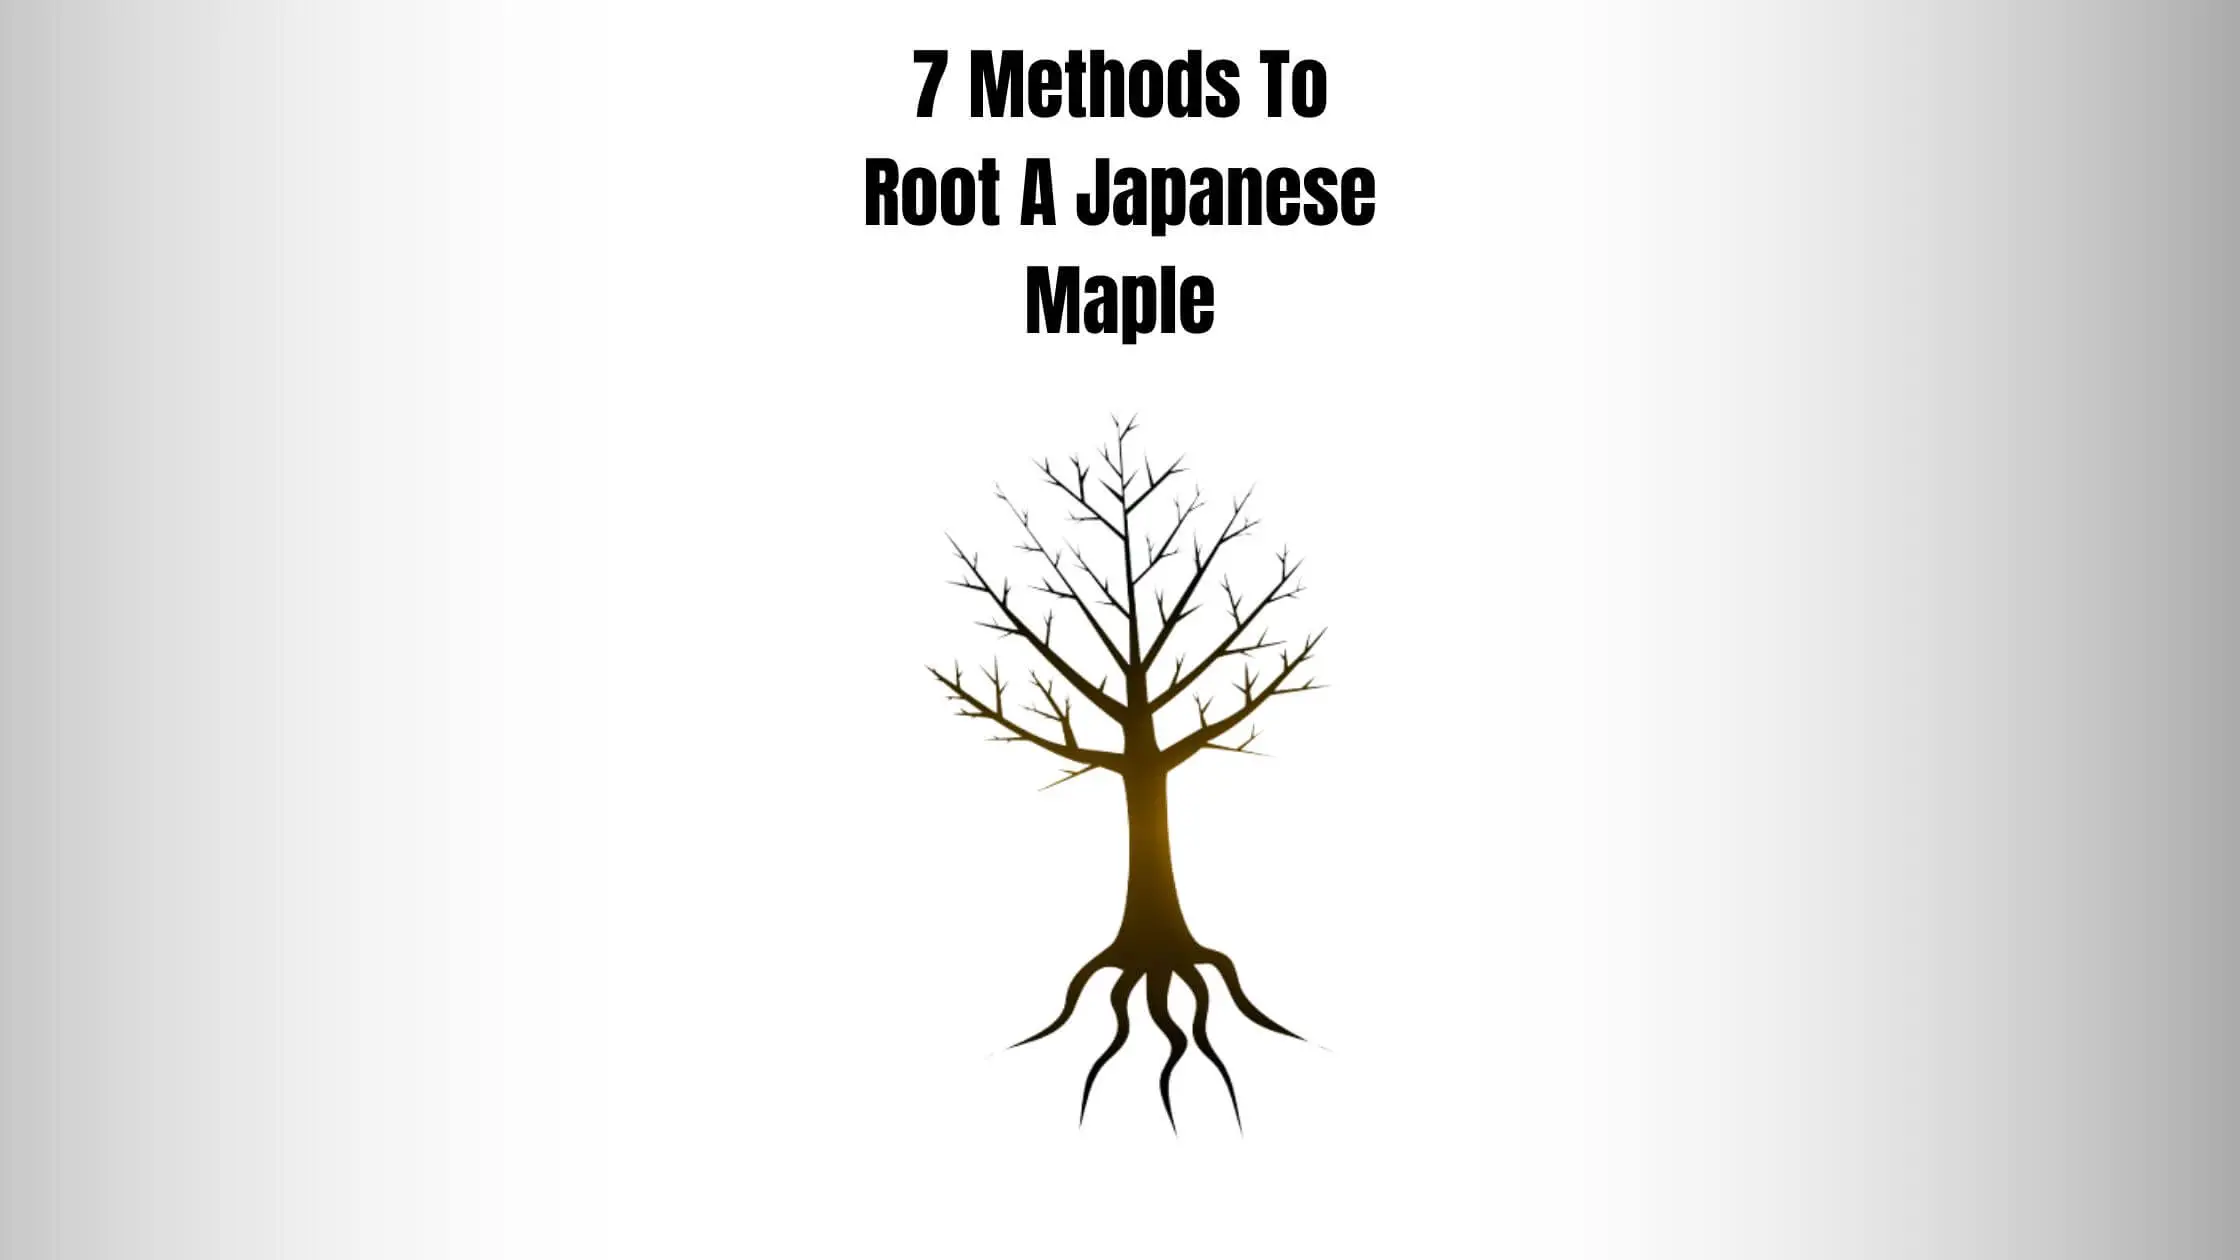 7 Methods To Root A Japanese Maple